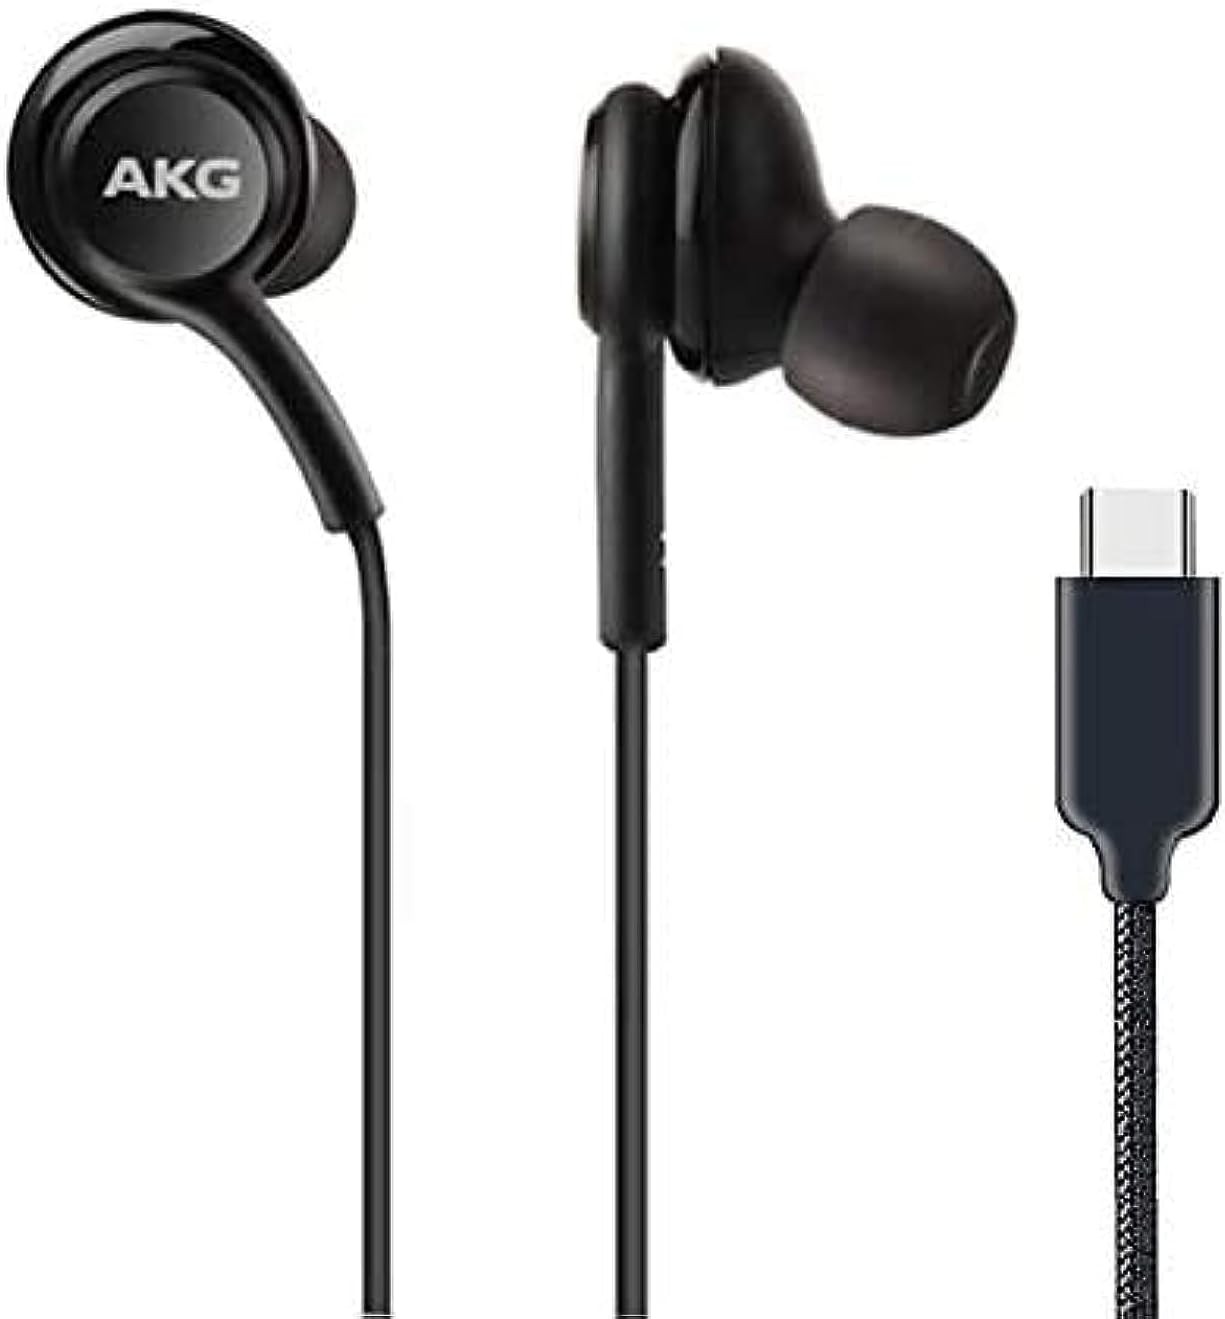 SAMSUNG Earphones USB Type-C EO-IC100, Sound by AKG, In-ear Headset Black, Wired